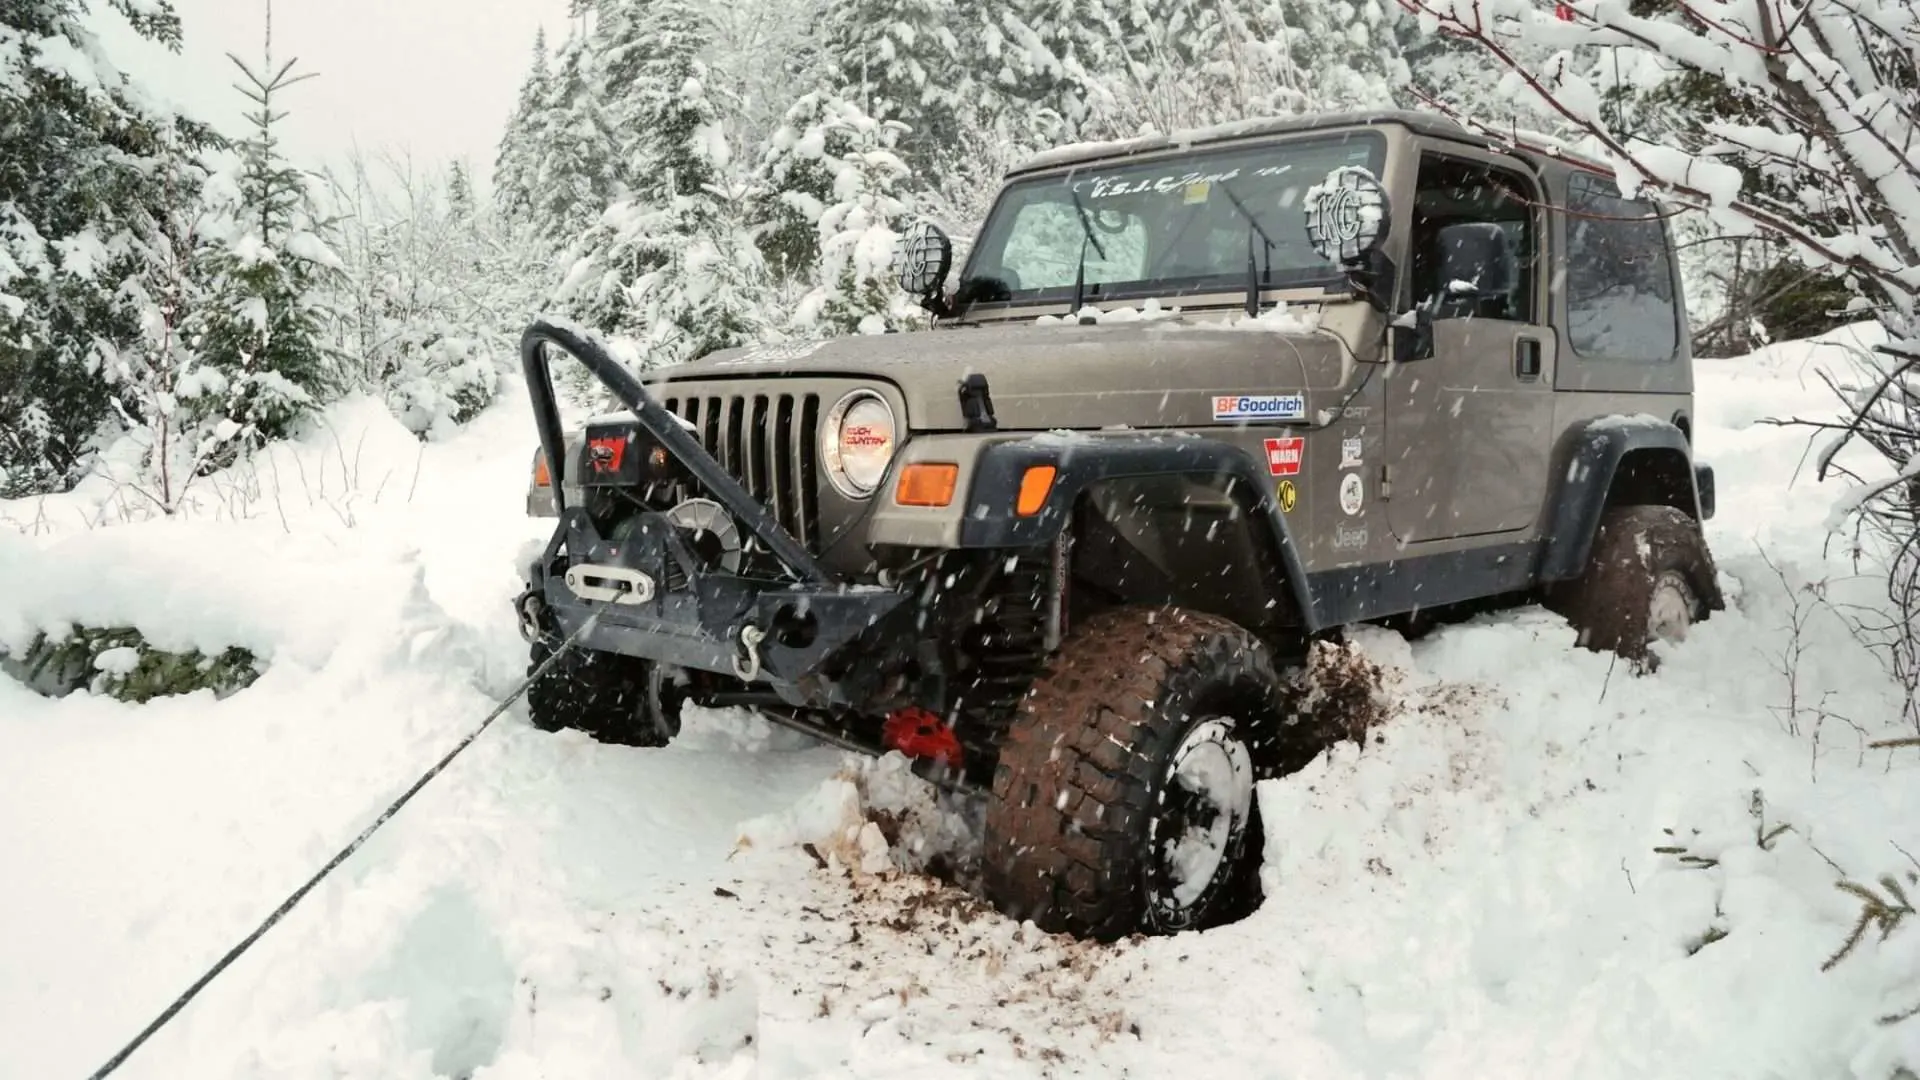 Jeep winching itself out of snow